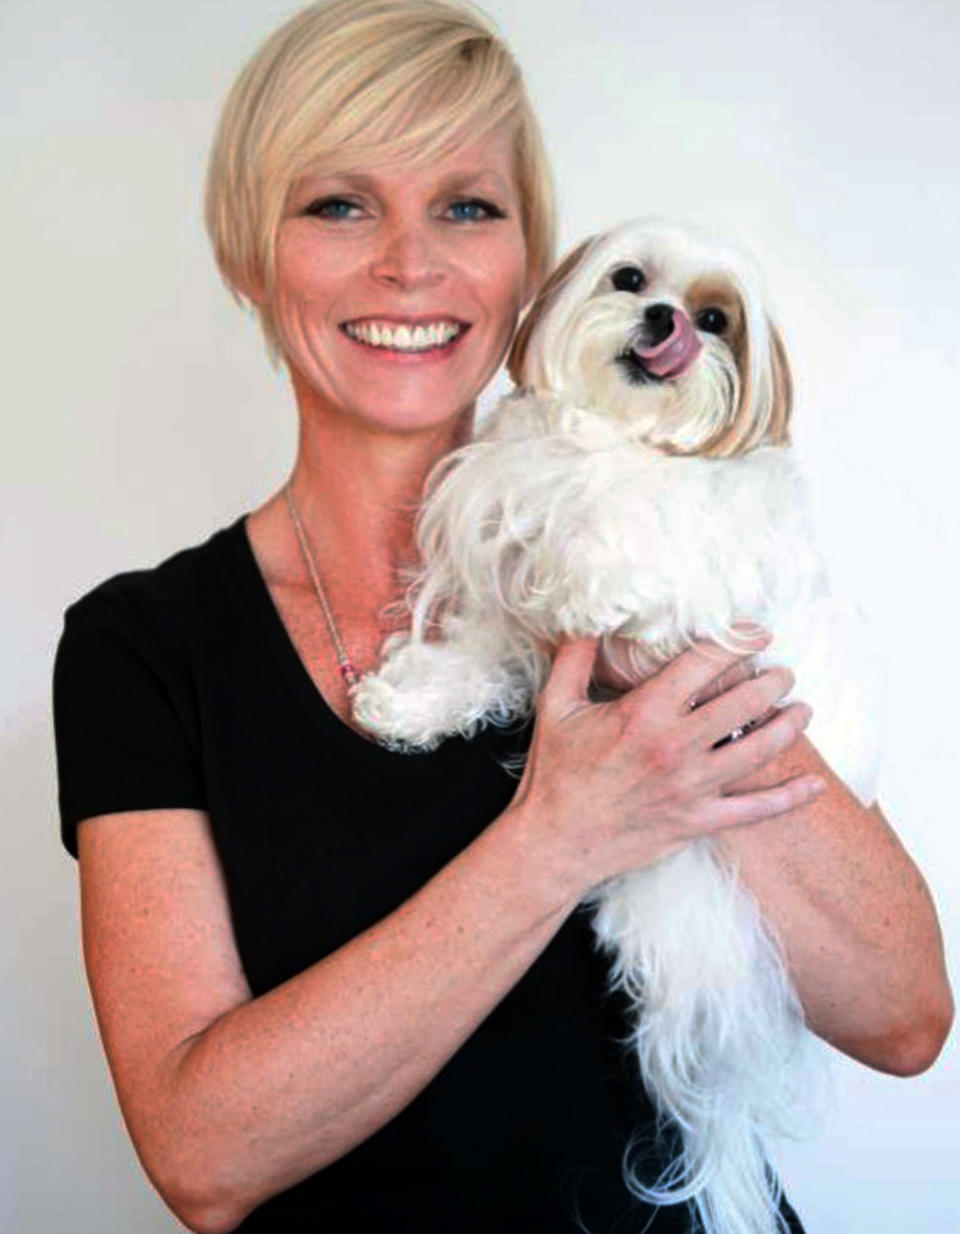 This undated image provided by Candice Ball shows Ball holding her dog, Toshi. Ball, of New York City, was tired of wasting money on training classes that didn't work for her or her 6-year-old shih tzu Toshi. "I failed the classes. He wasn't treat-motivated. We sat and stared at each other. Then someone recommended Babette Haggerty's and her praise-only training methods." she said. A well-trained Toshi has since appeared on "Law and Order: SVU," the final episode of "30 Rock" and in a New York Yankees commercial for MasterCard. (AP Photo/Candice Ball)